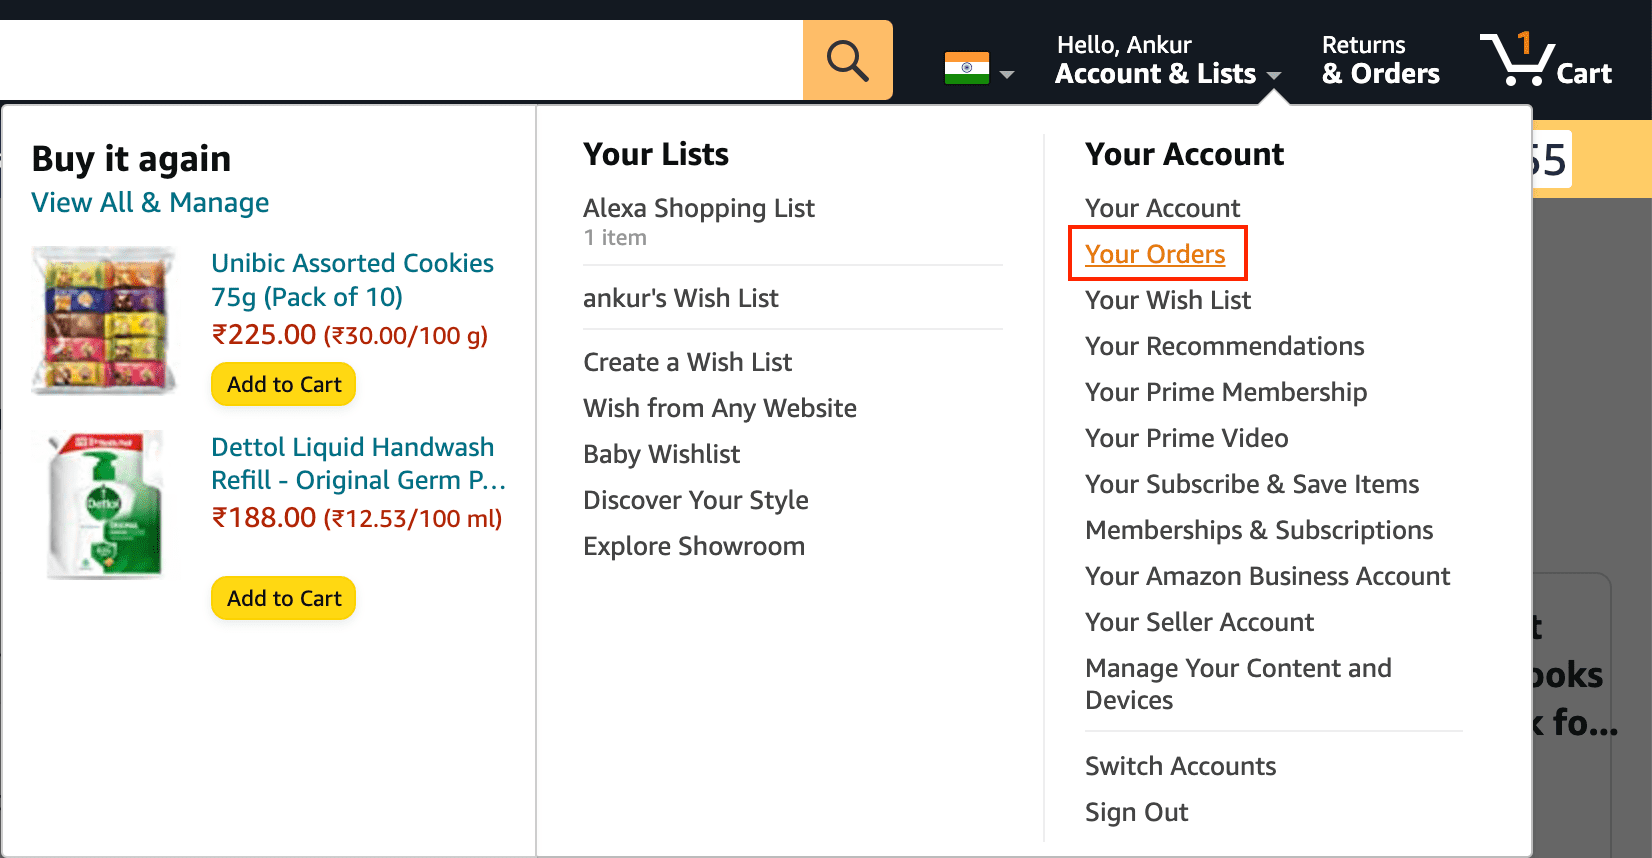 Access your orders on Amazon